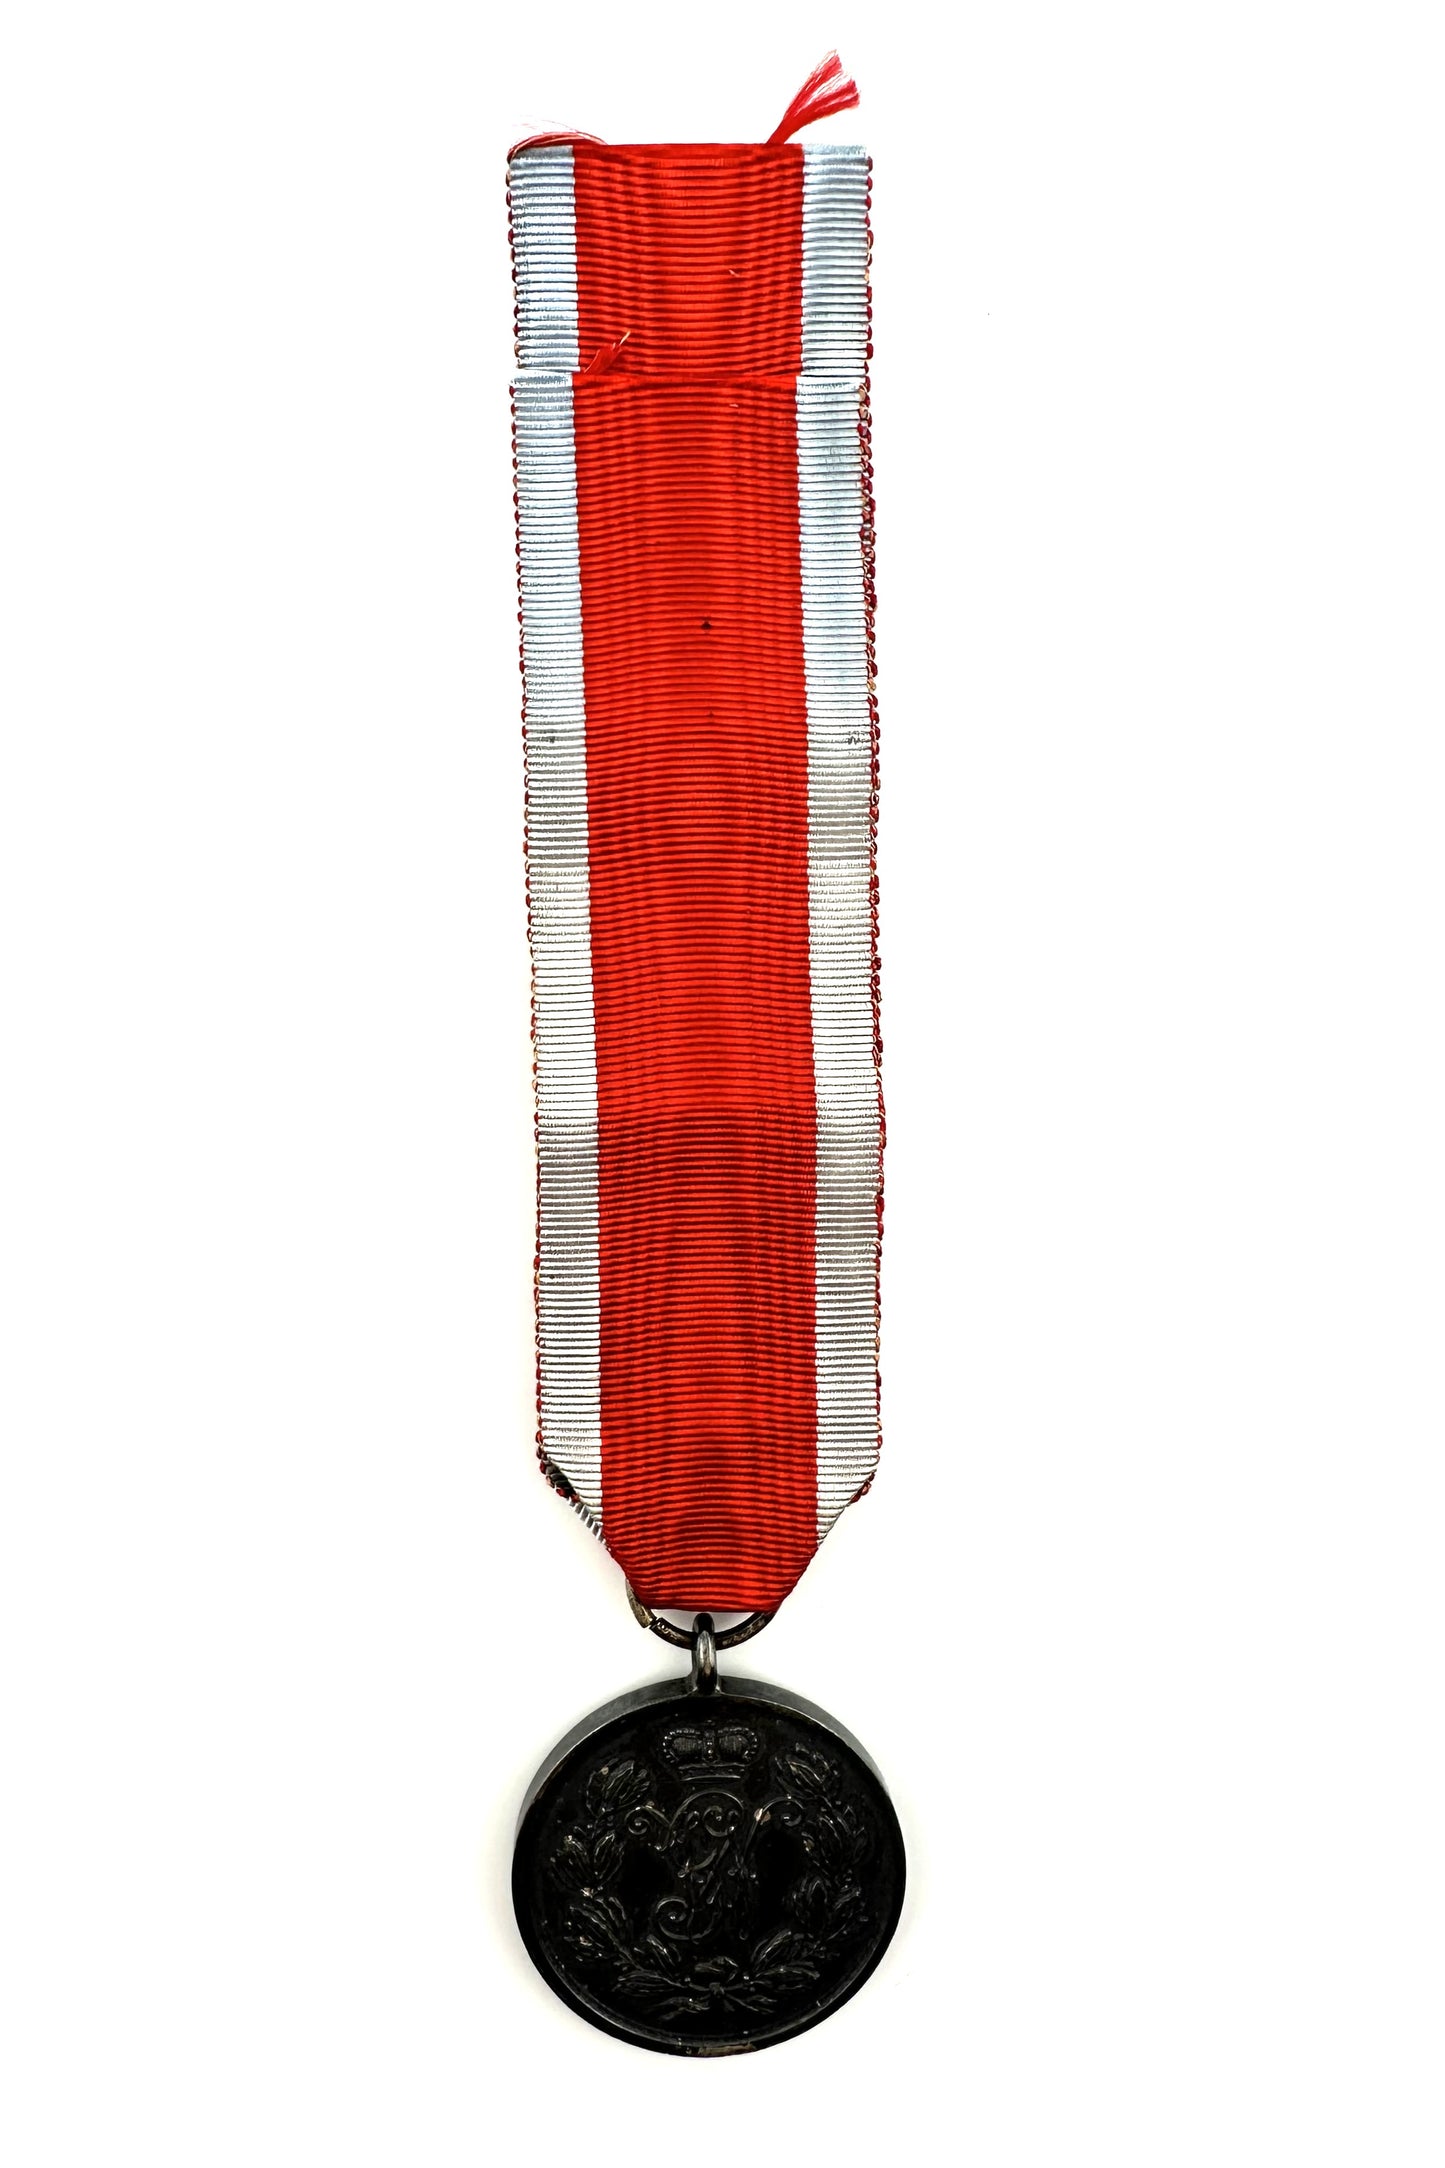 Hesse-Darmstadt Military Service Medal - Derrittmeister Militaria Group